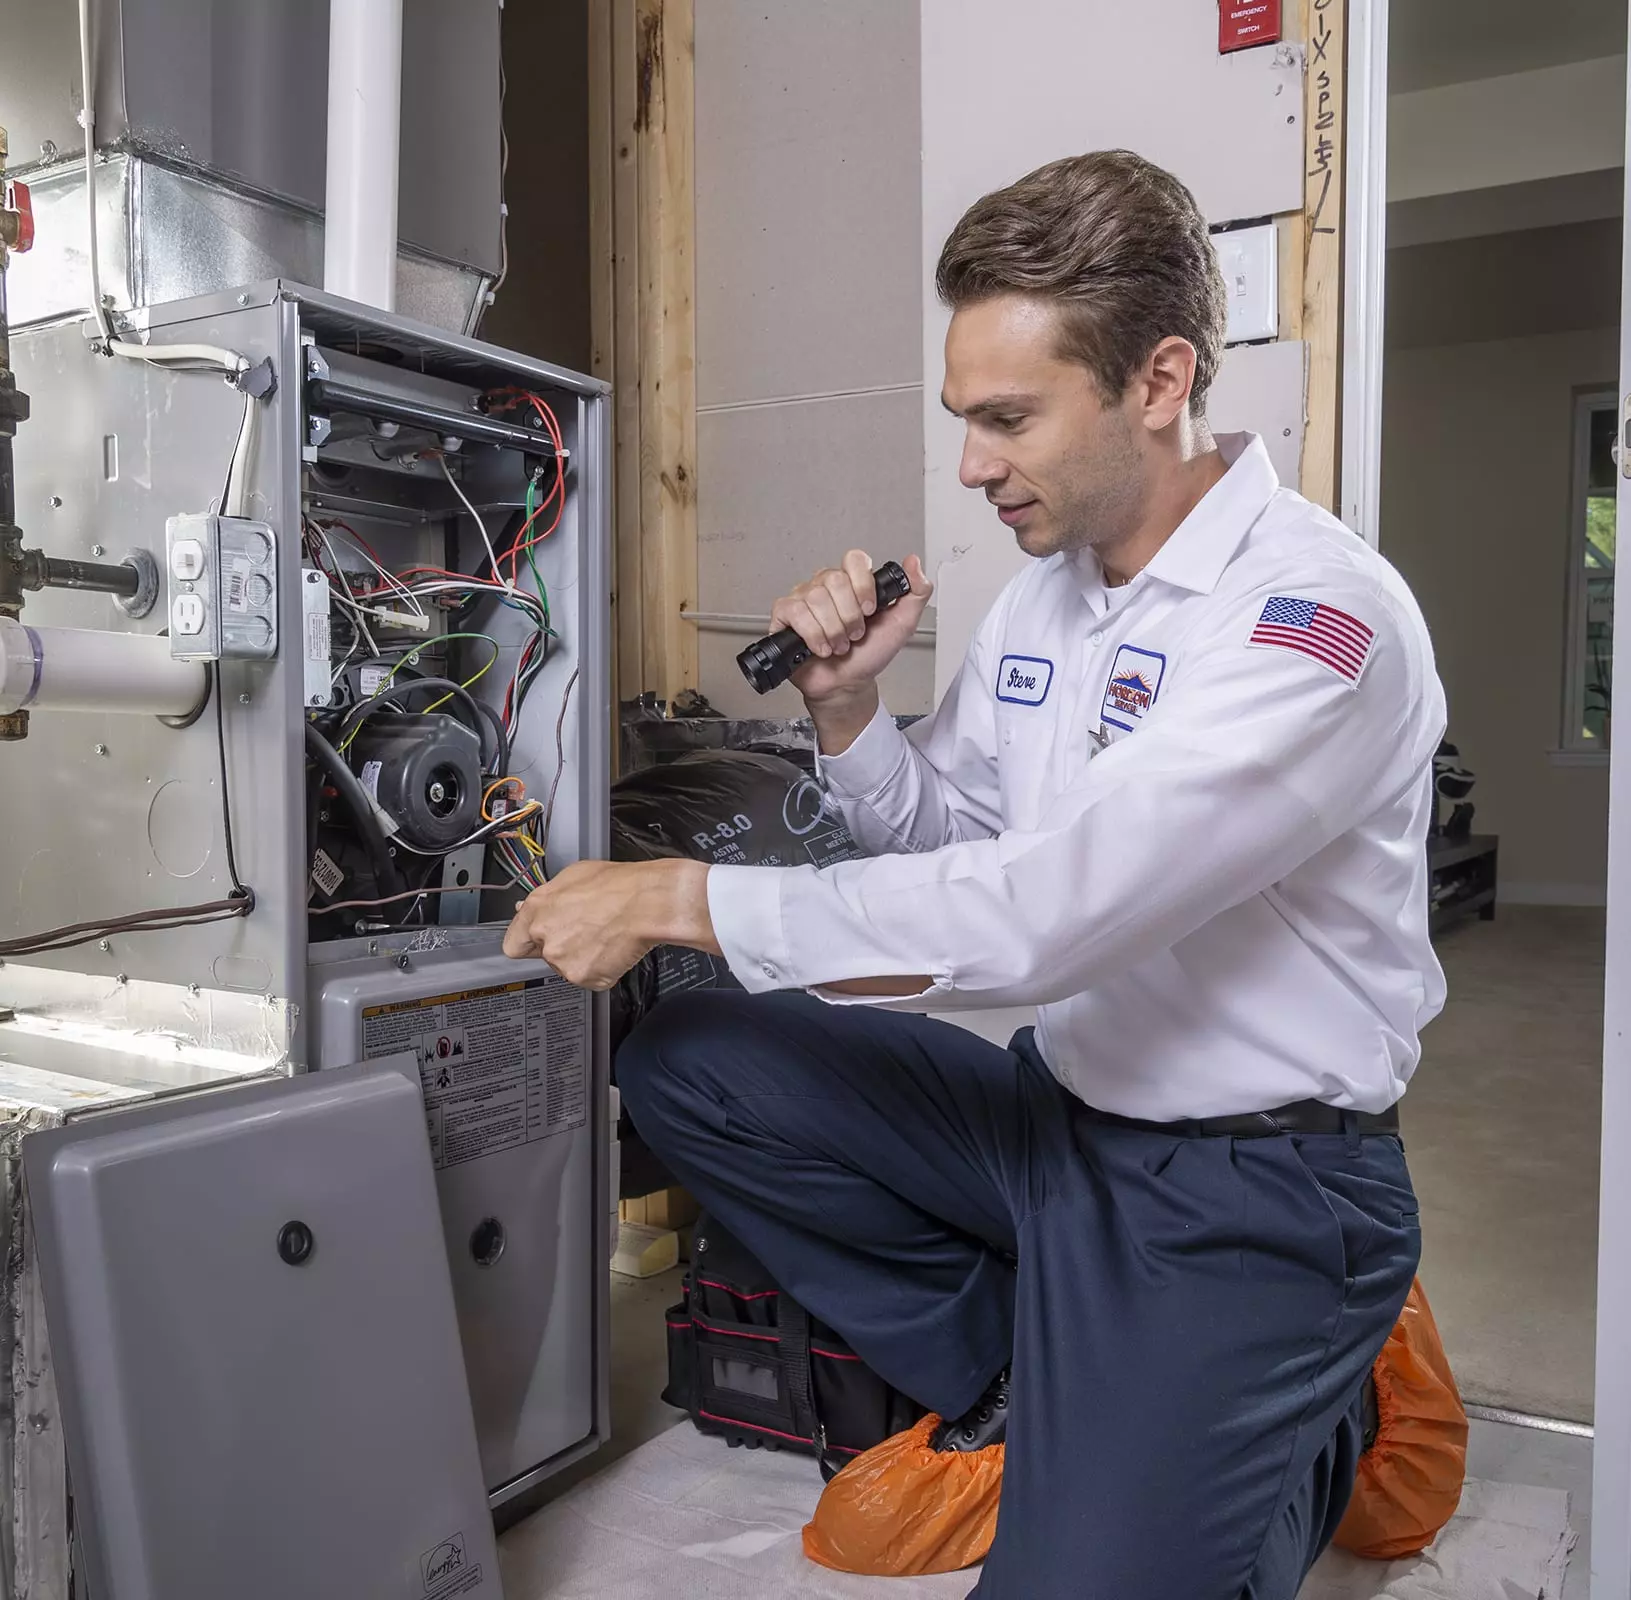 Furnace Repair Near StLouis - Crystal Heating and Cooling